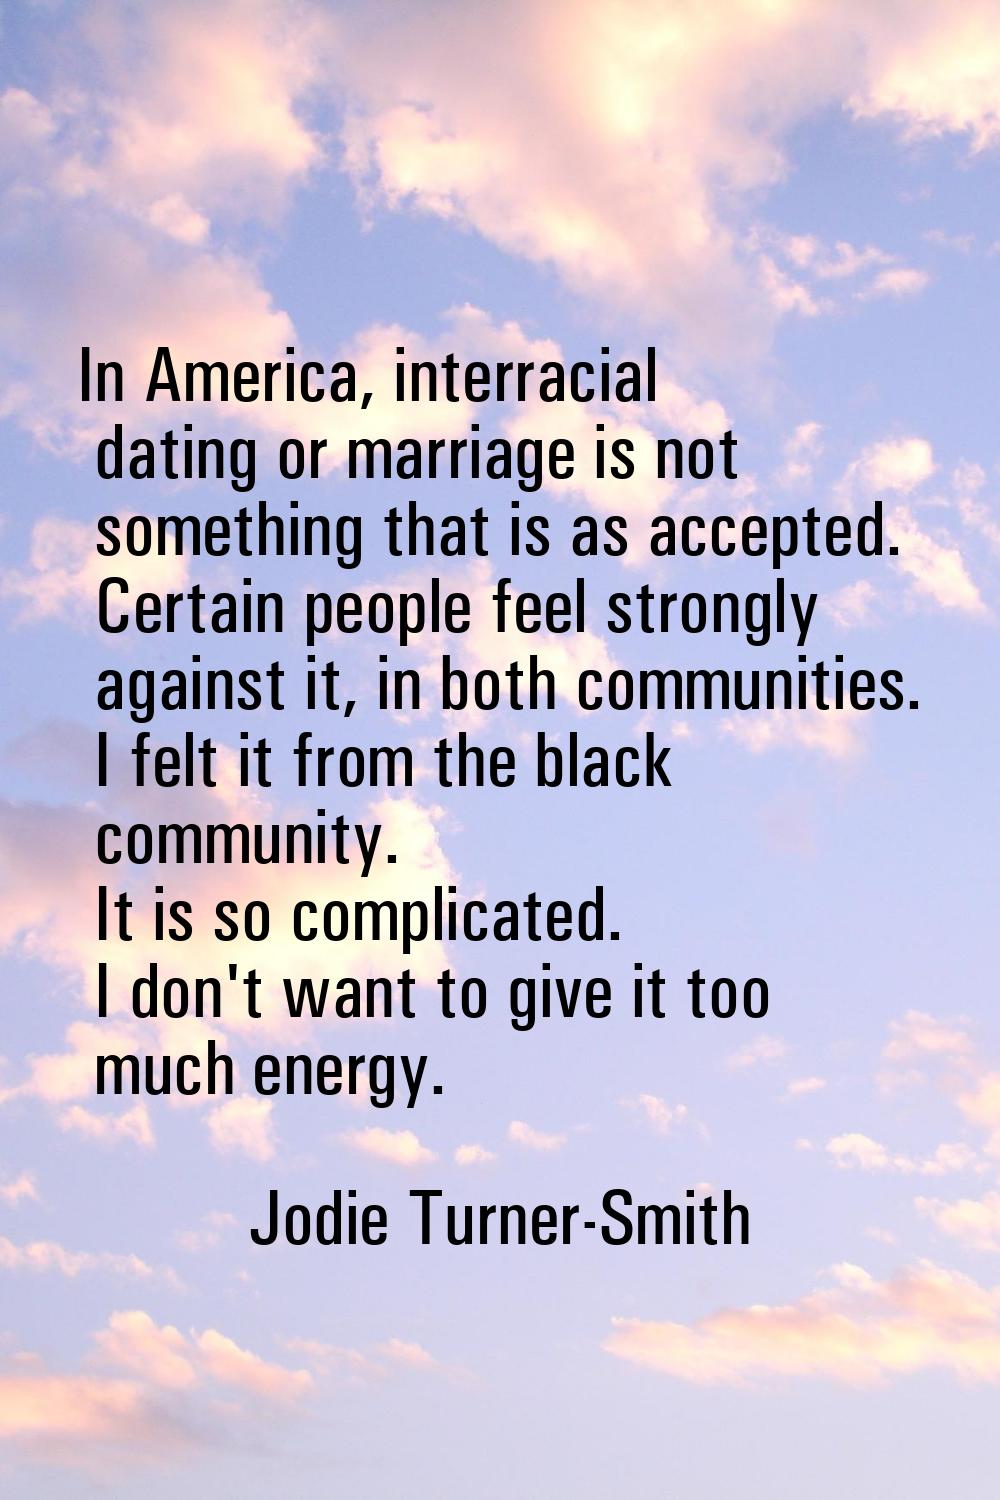 In America, interracial dating or marriage is not something that is as accepted. Certain people fee